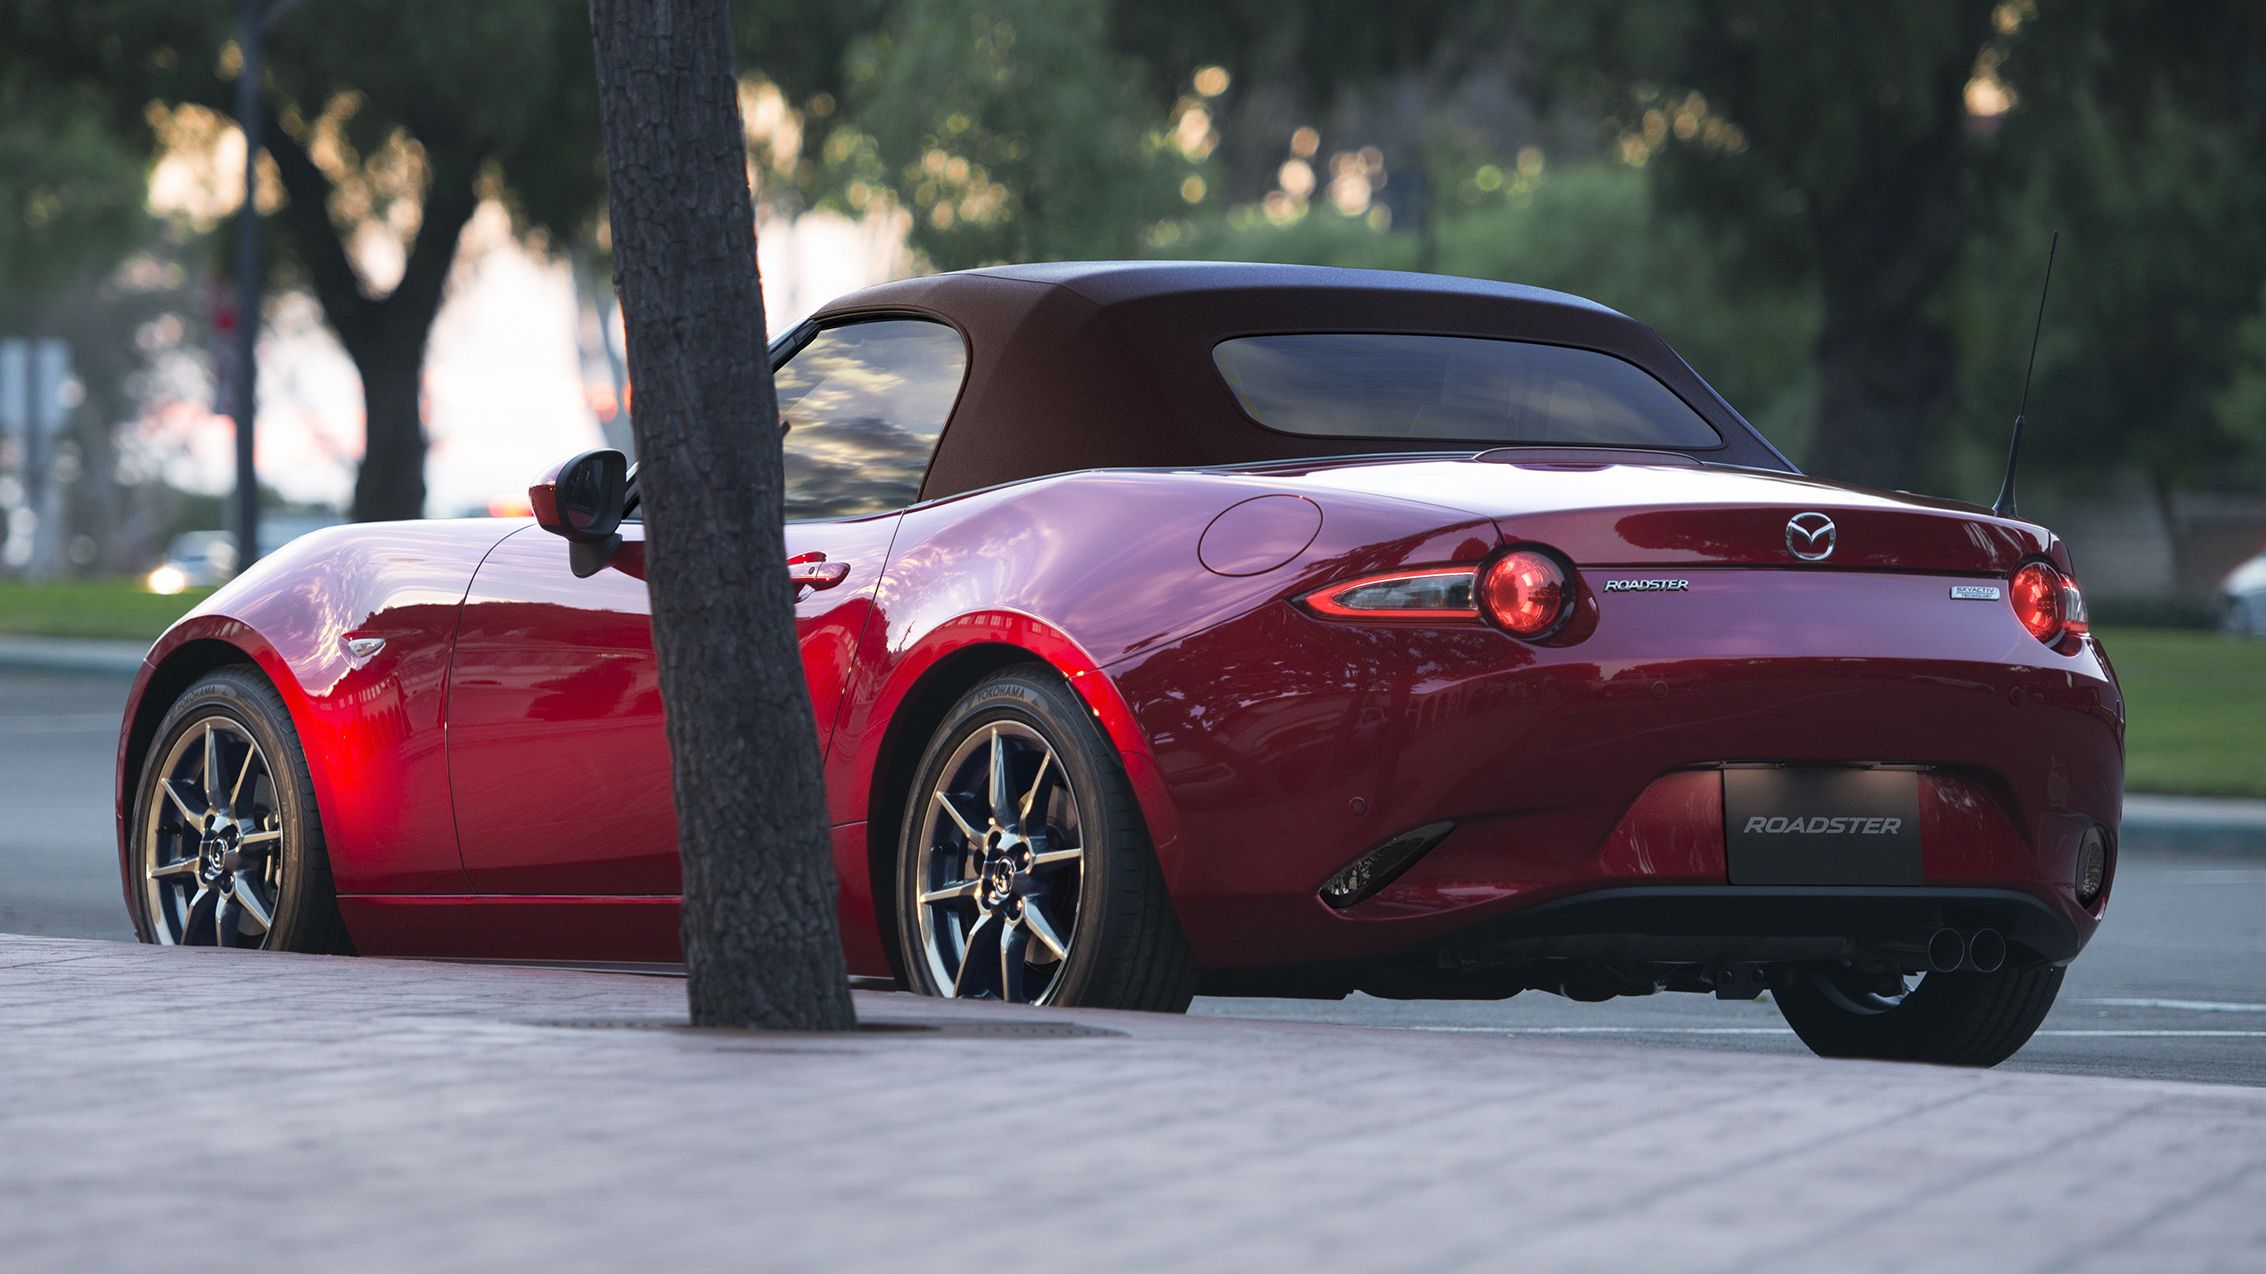 Mazda MX-5 update detailed – 2.0L jumps from 160 to 184 PS; lower emissions, improved active safety